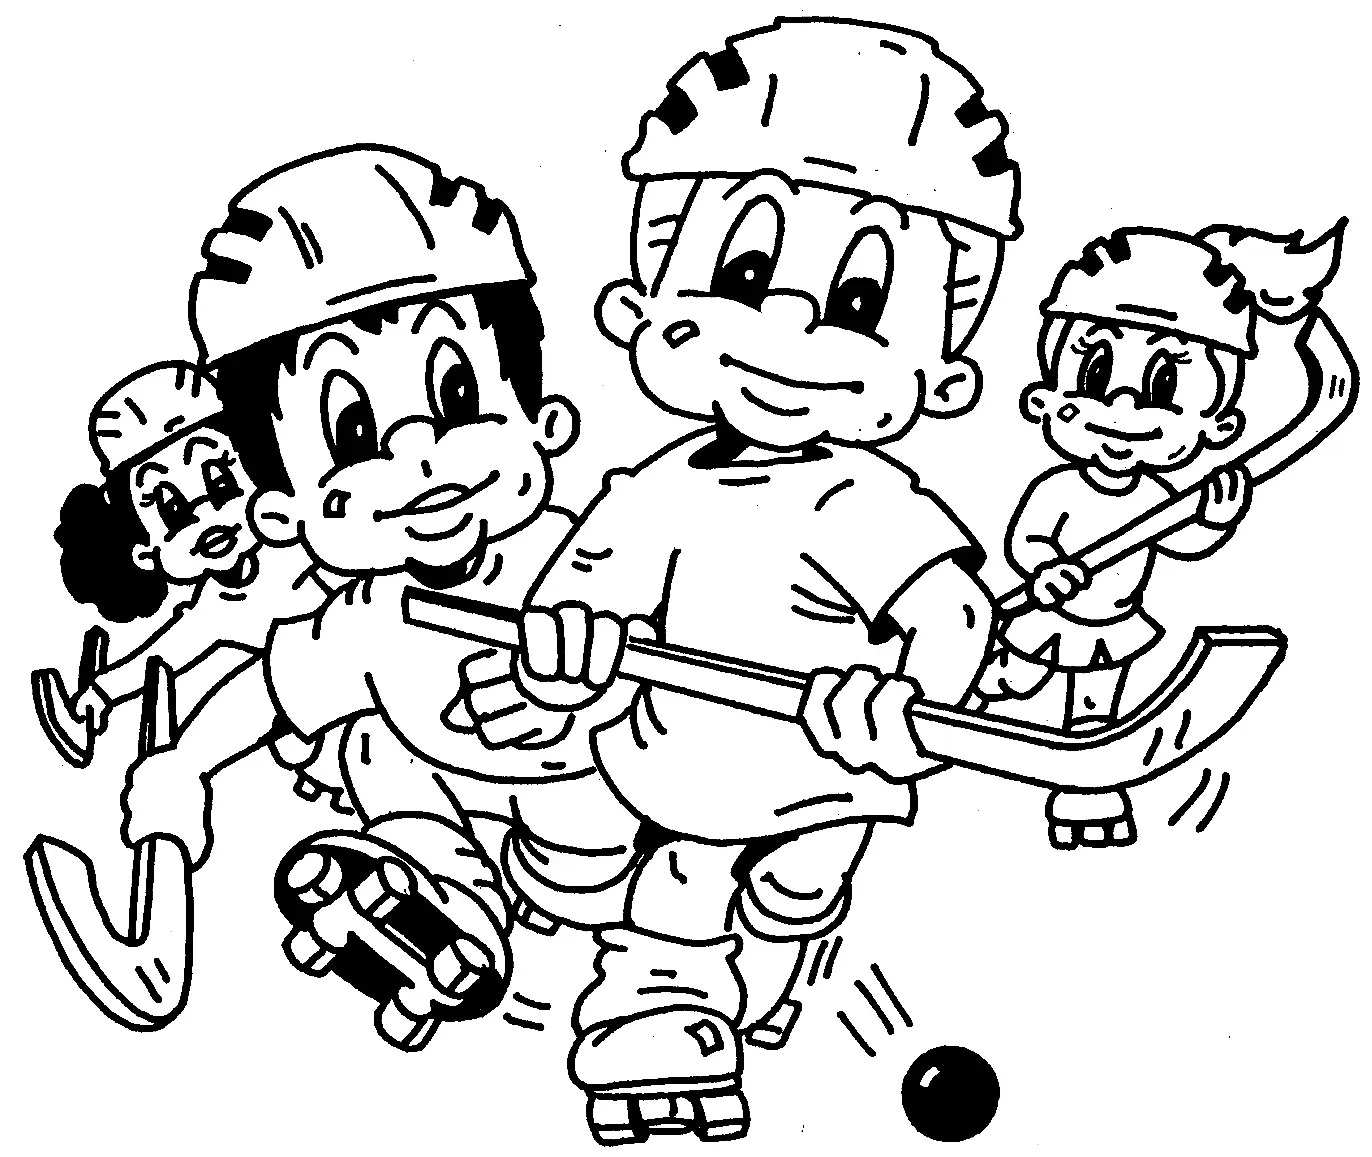 Hockey Coloring Pages